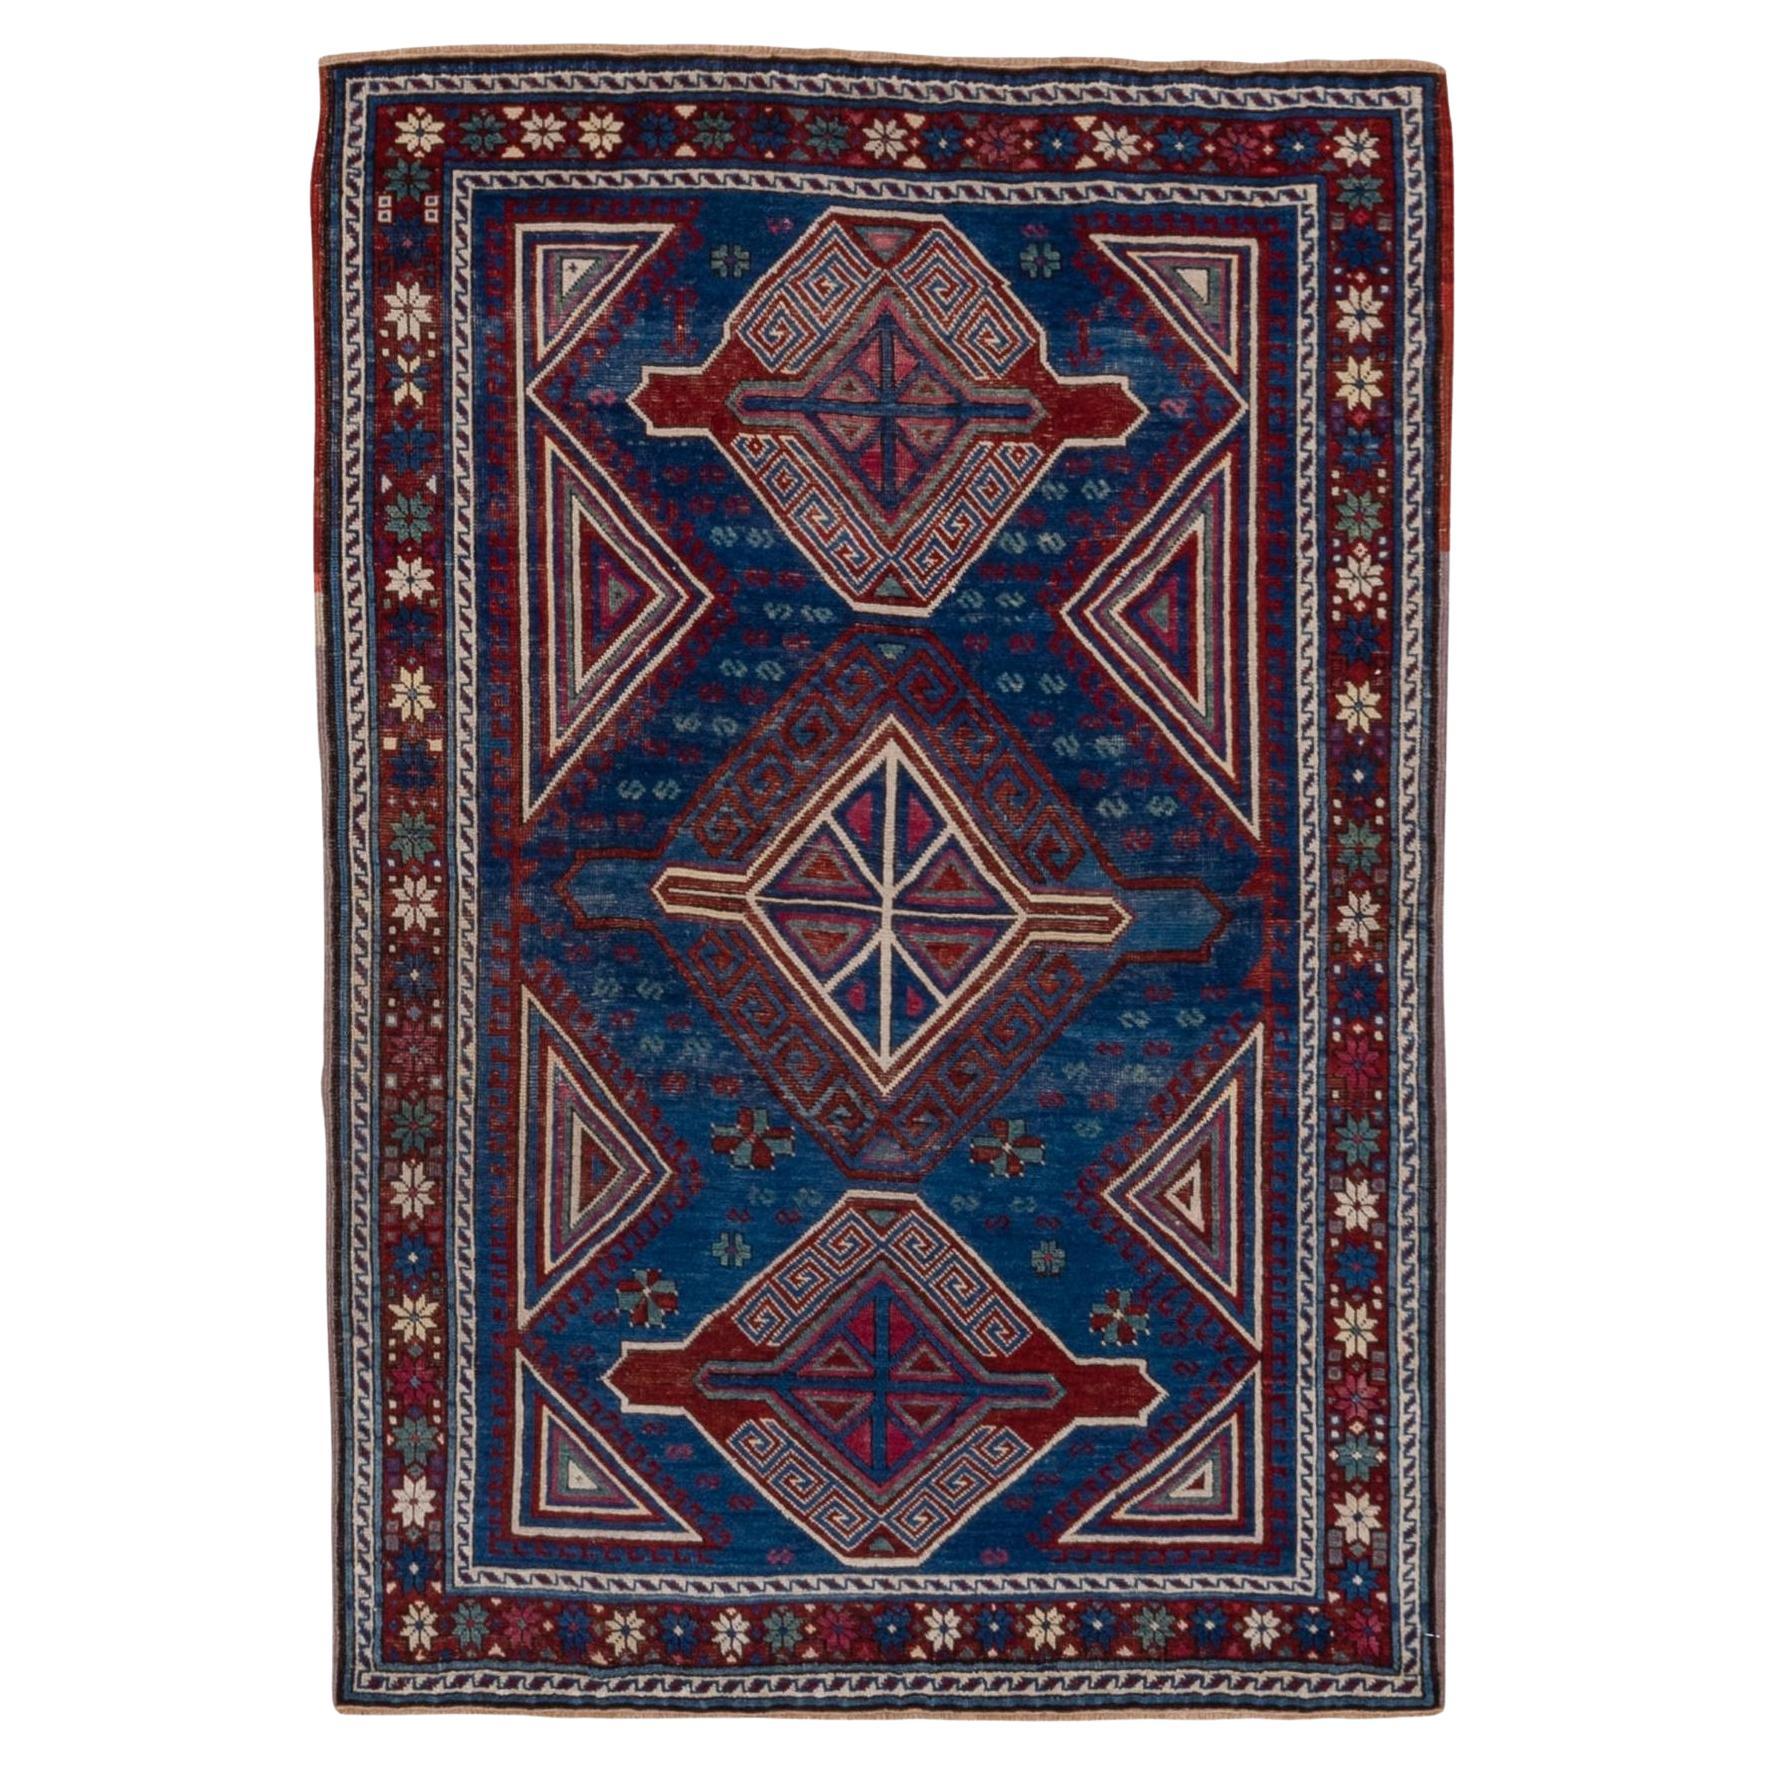 Antique Caucasian Kuba Area Rug, Dark Blue Field, Red Borders, Pink Accents For Sale